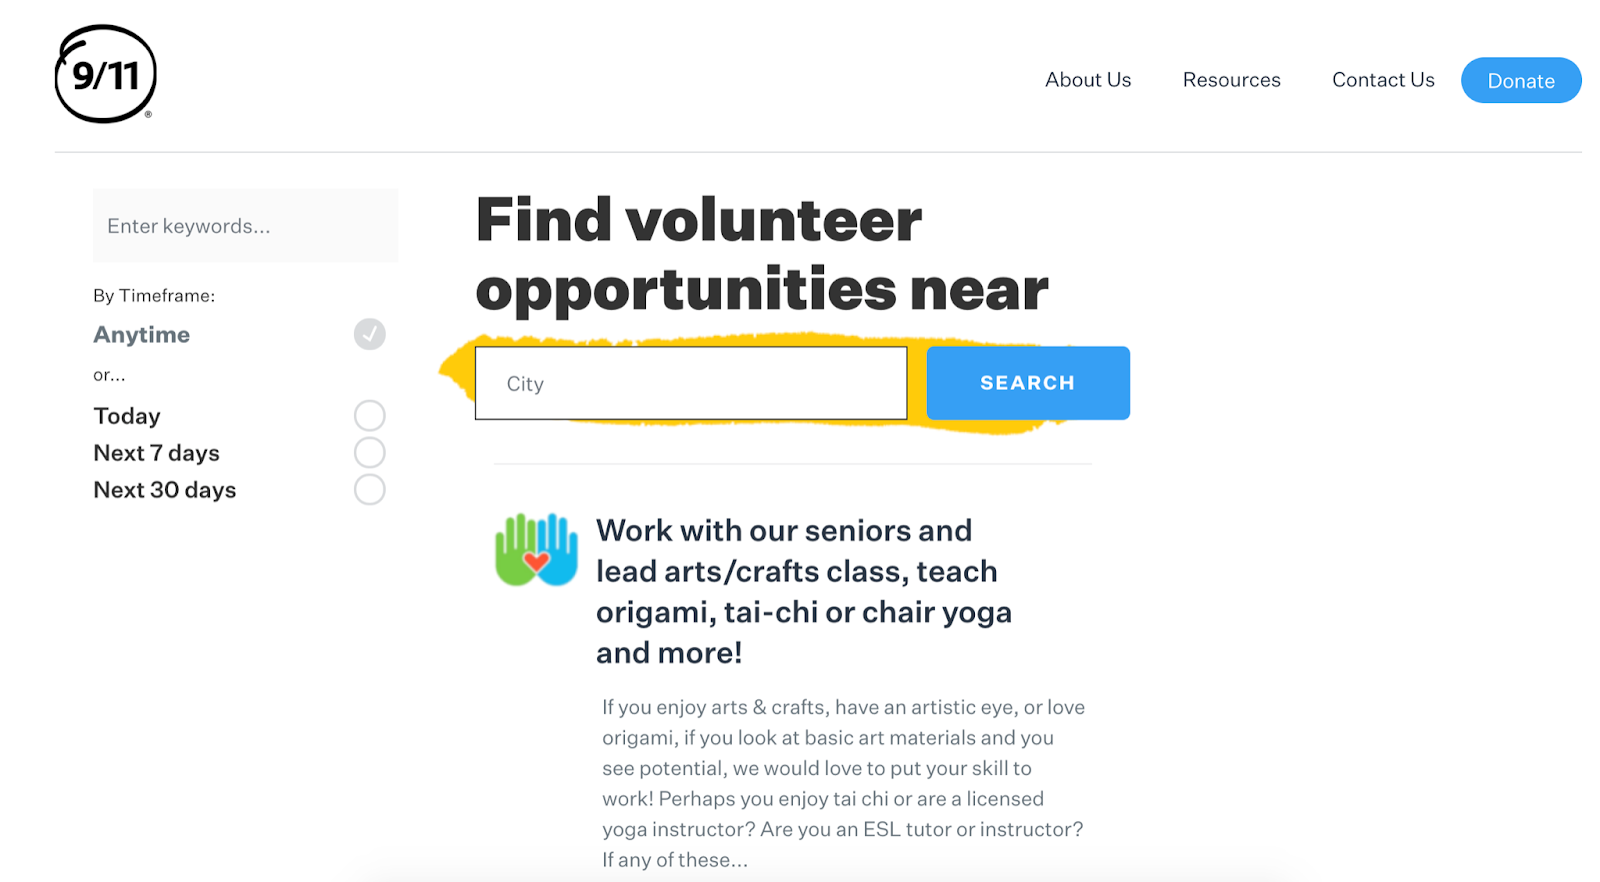 The search engine for discovering volunteer work options on the 911day.org website. You can search using keywords or location.